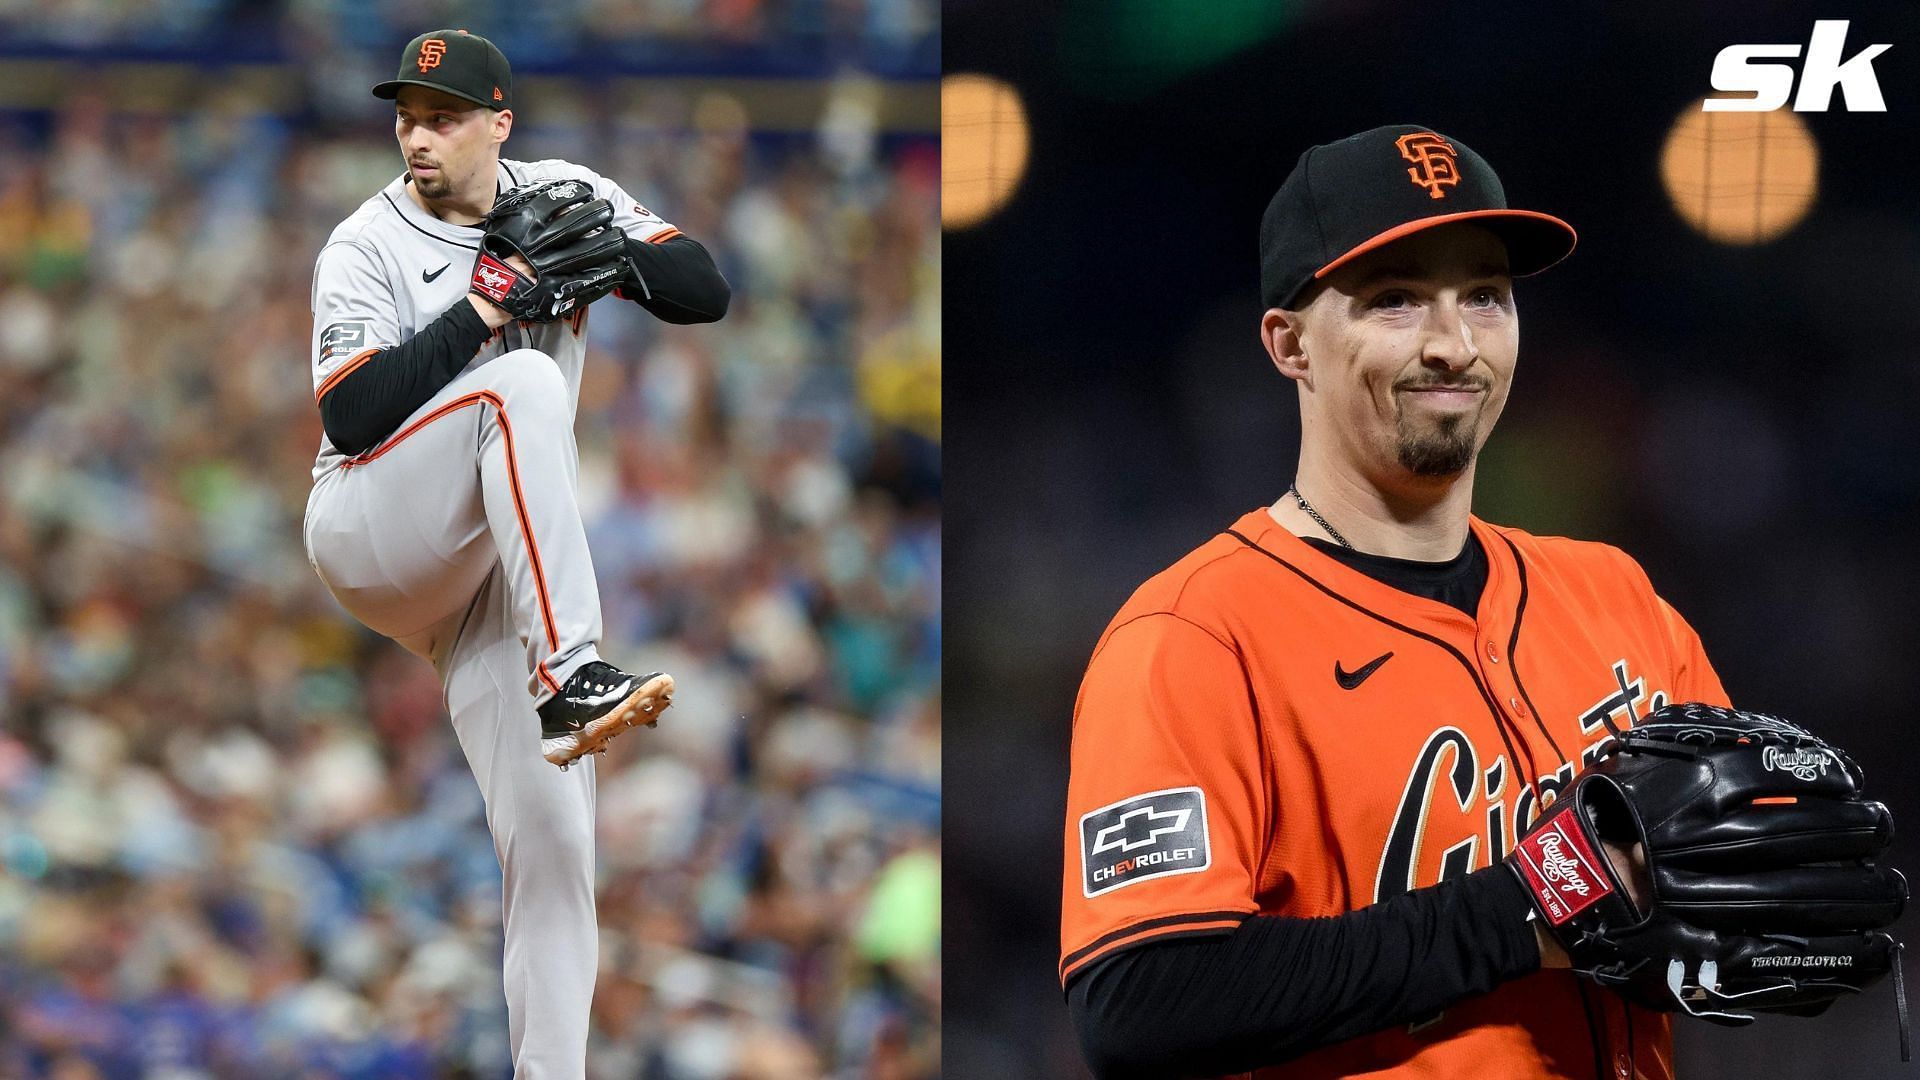 Giants reliever Taylor Rogers believes Blake Snell is focused on silenciing his critics as his eyes return